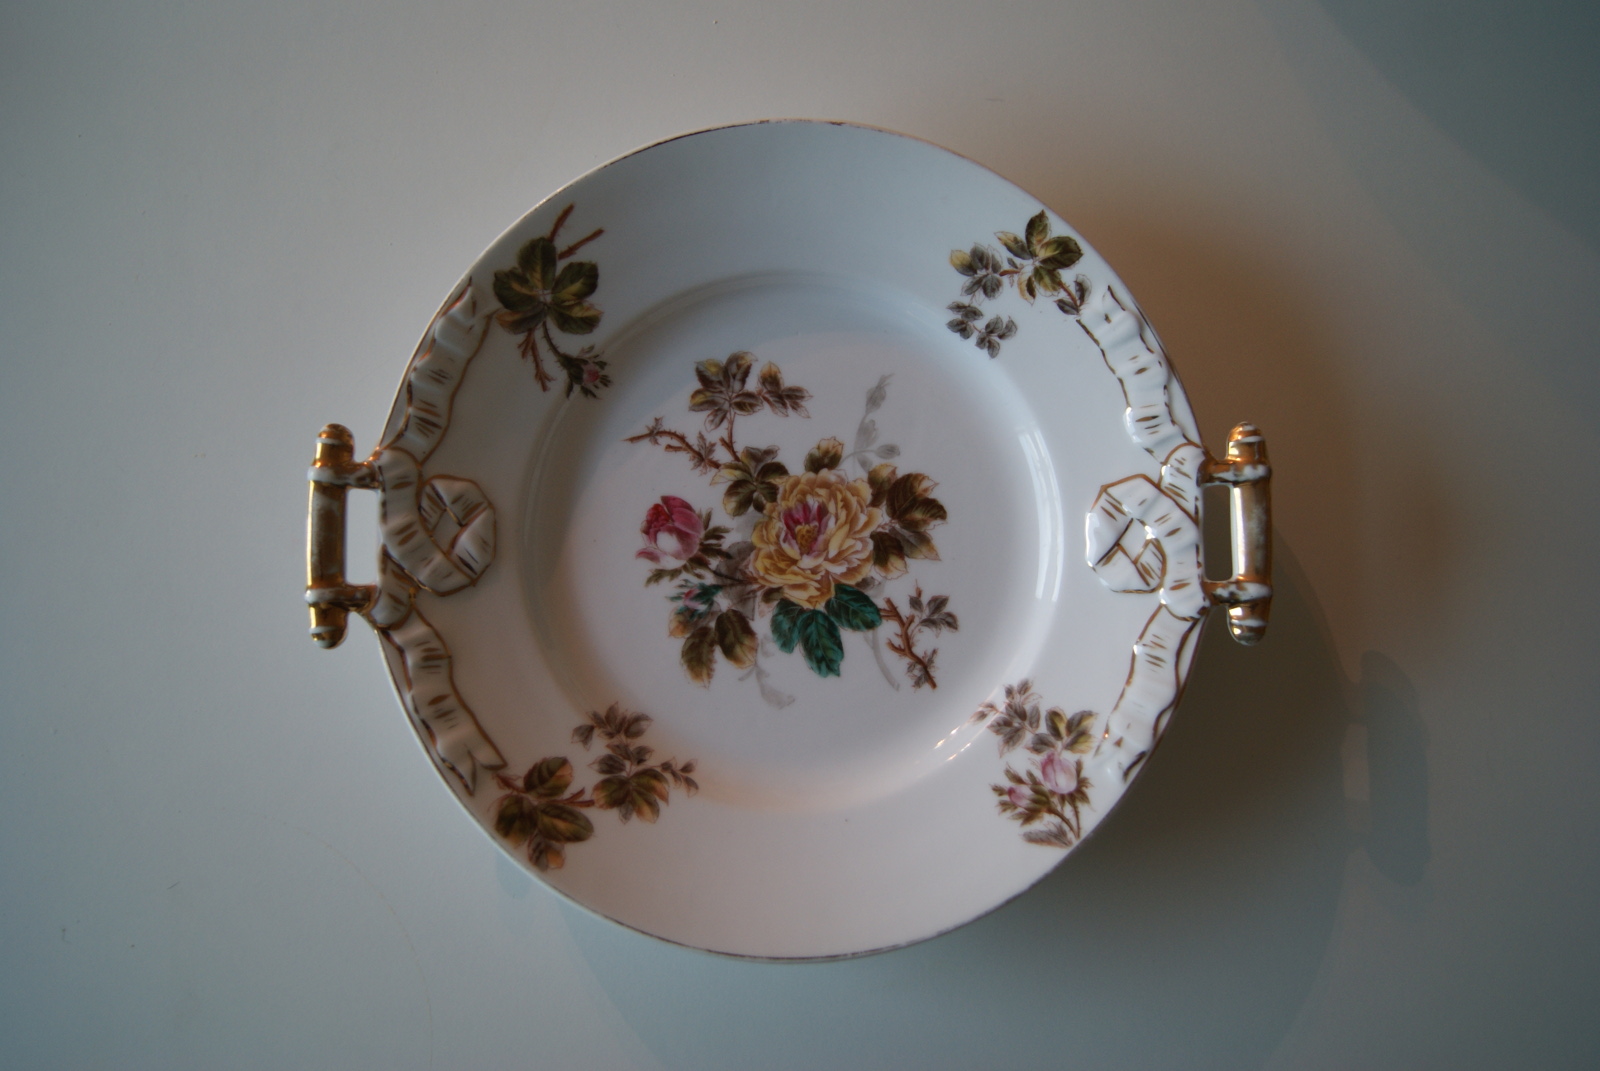 Waldenburg - Altwasser dish with bouquet yellow red flowers roses leaves and relief